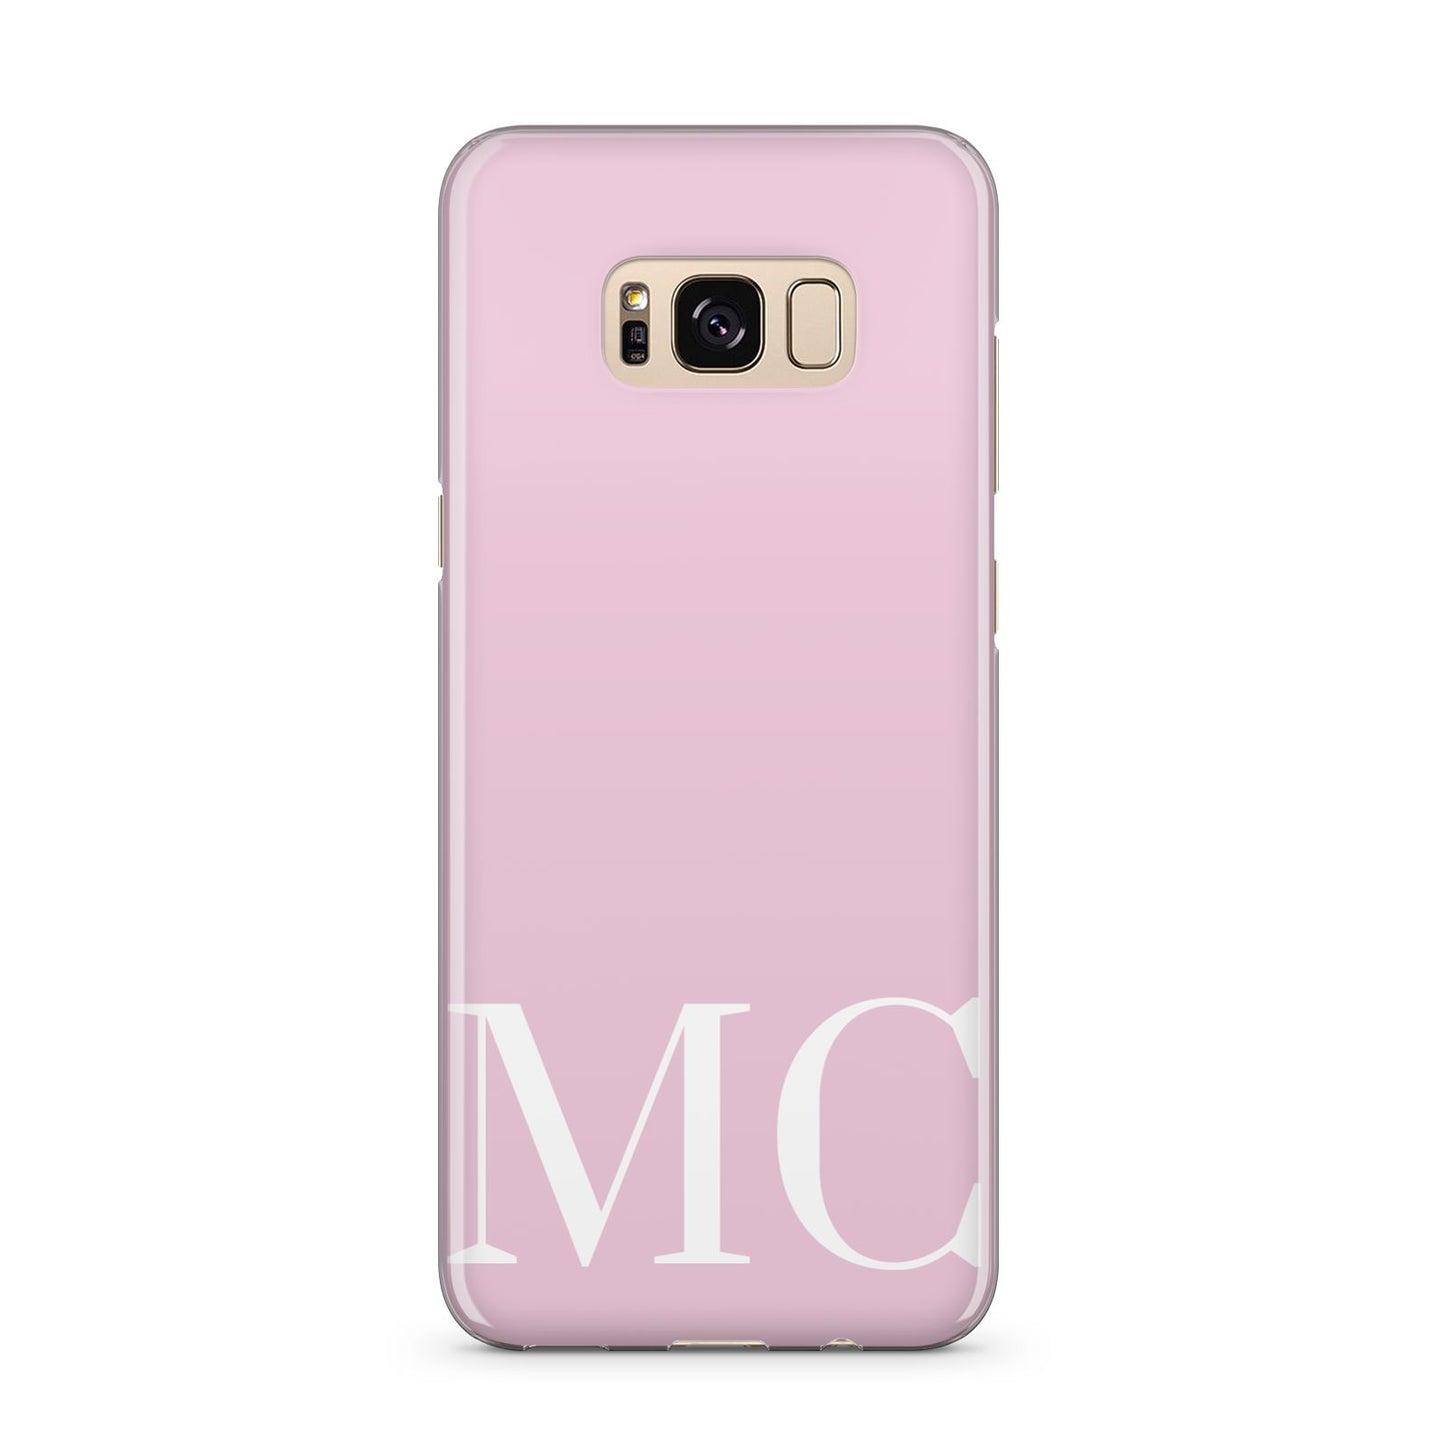 Initials Personalised 2 Samsung Galaxy S8 Plus Case